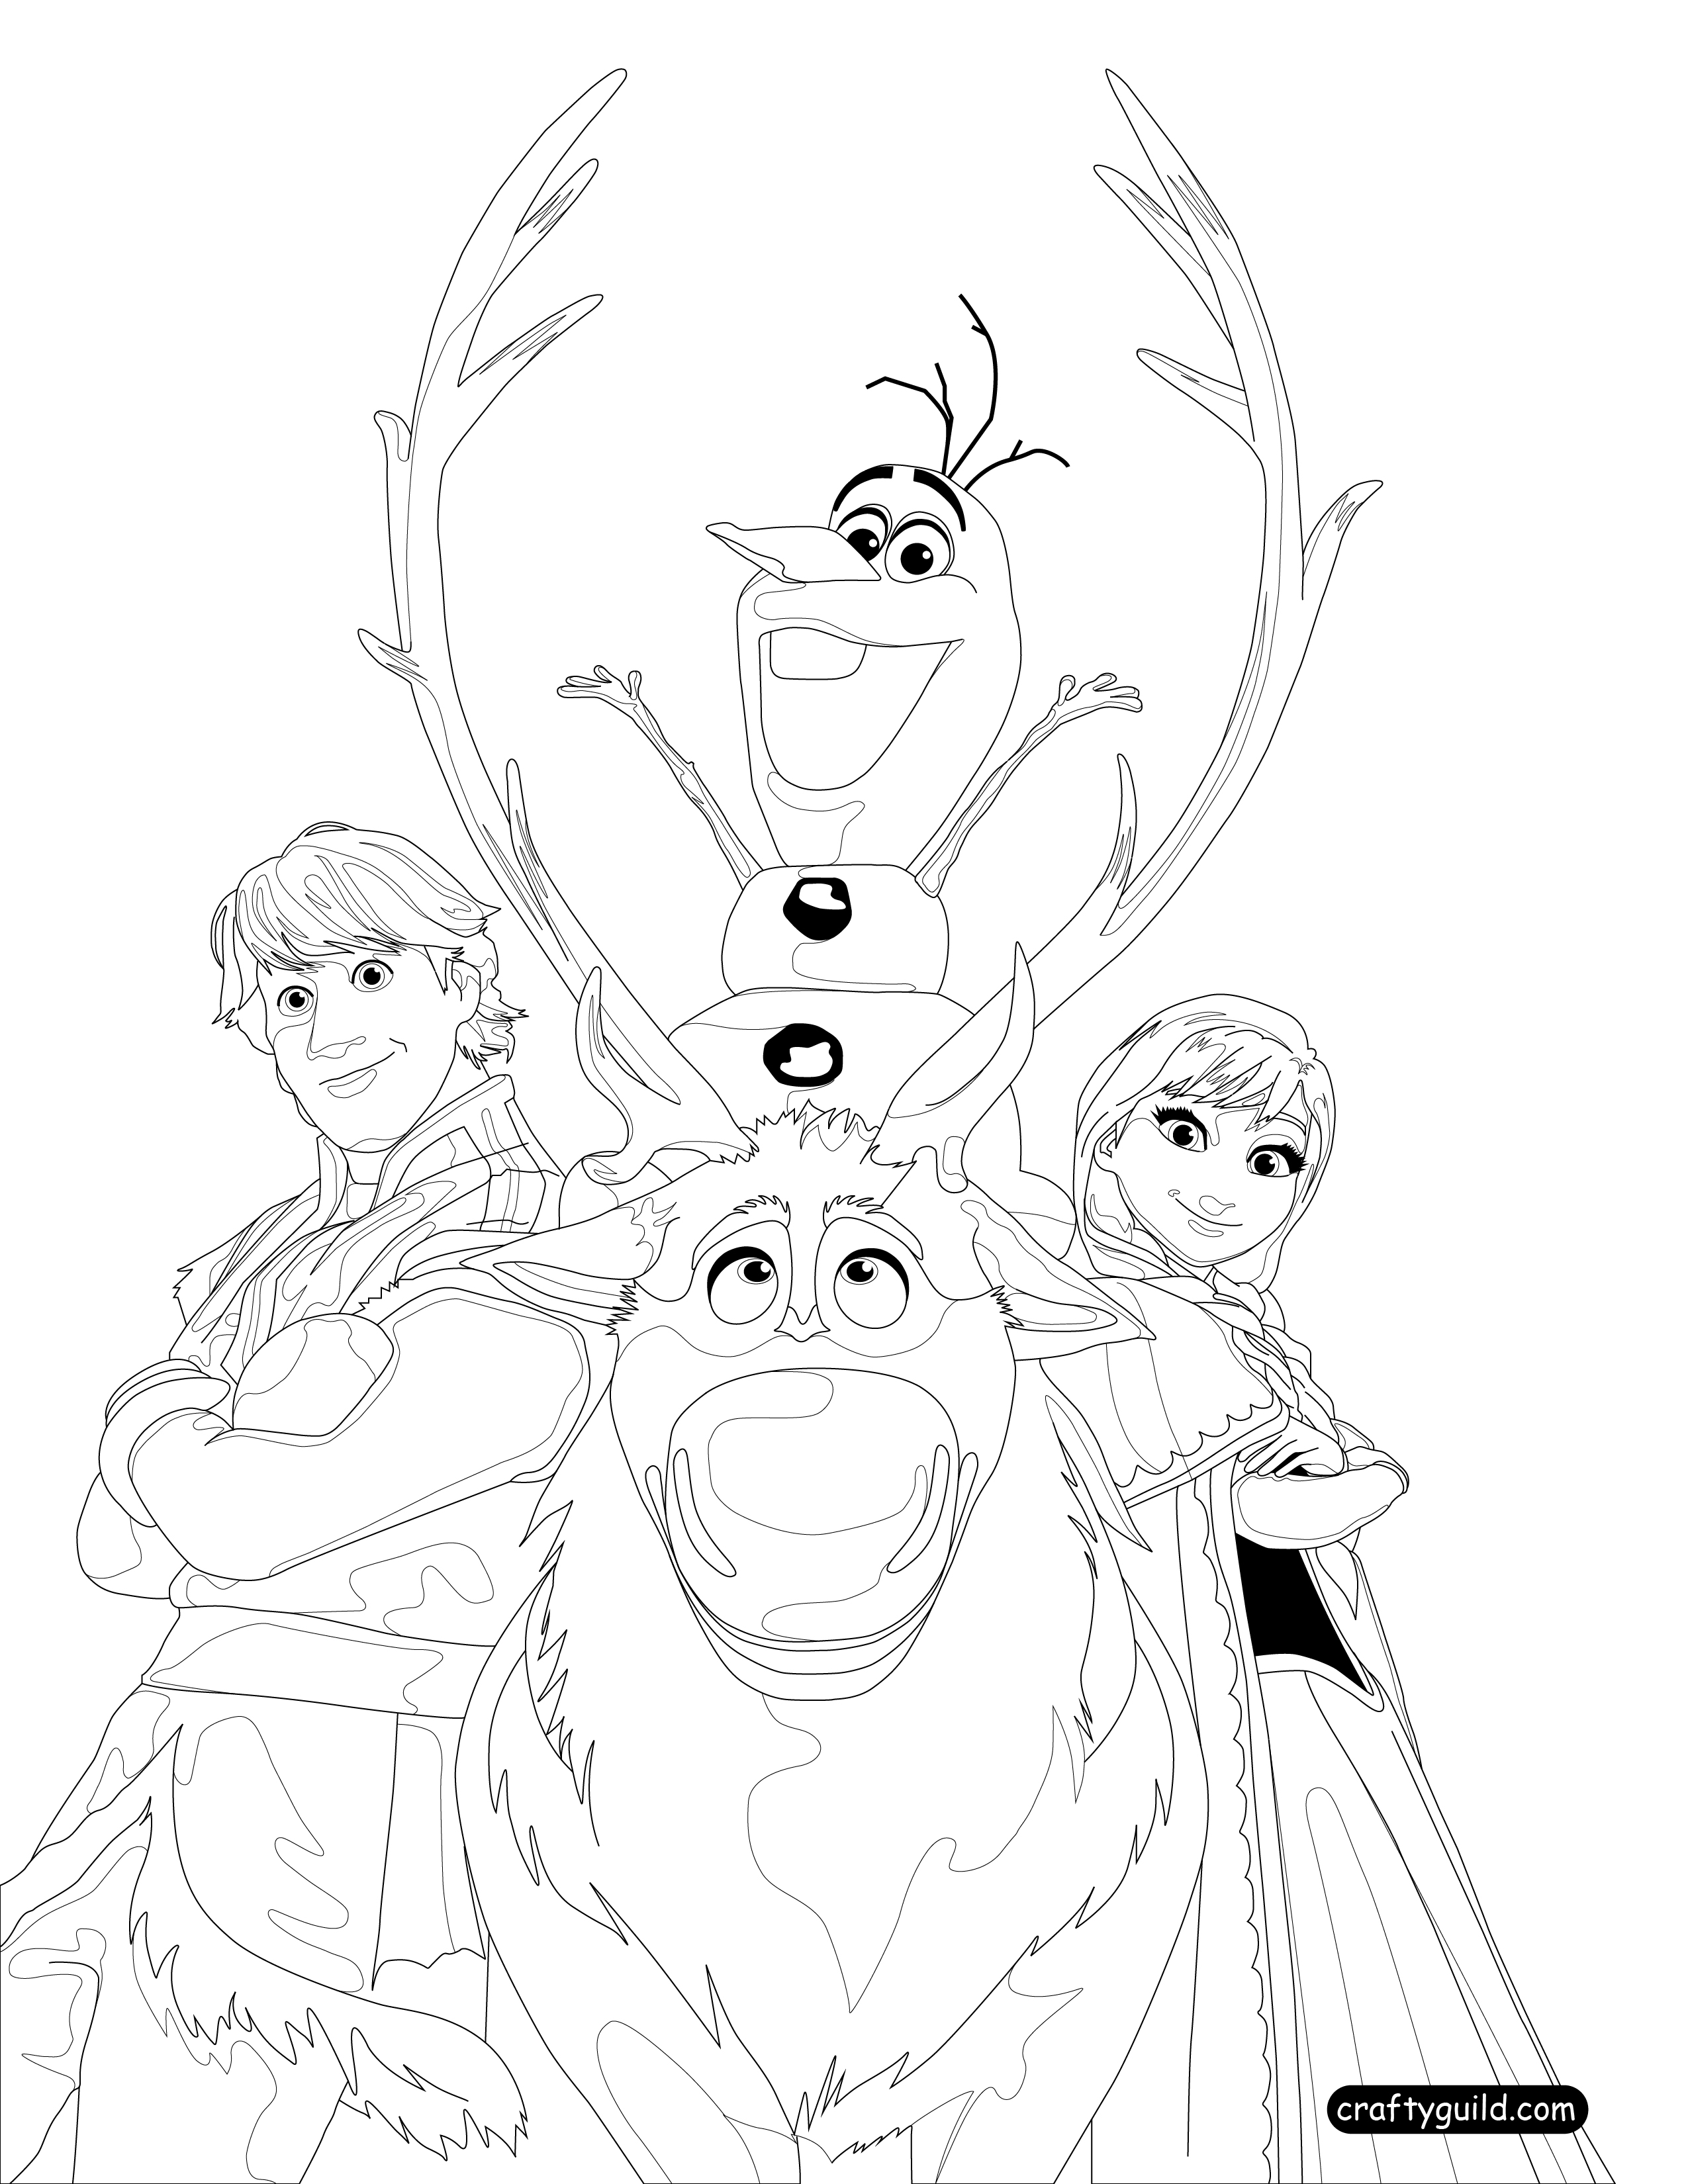 Coloring Page Frozen 71787 Animation Movies Printable Coloring Pages